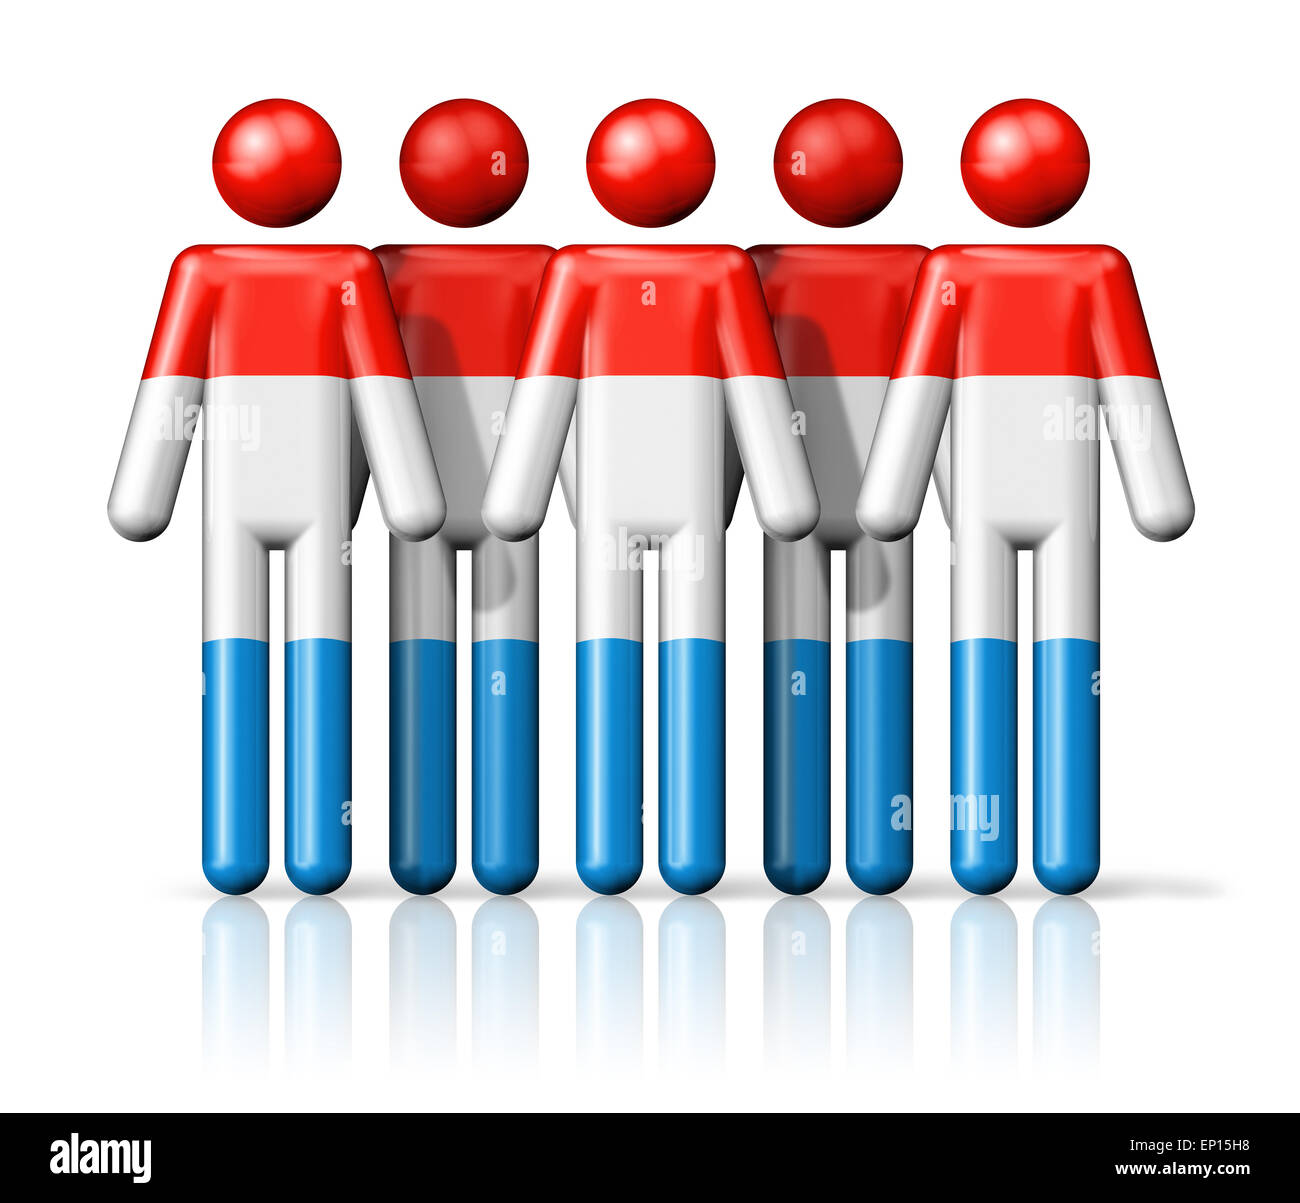 Flag of Luxembourg on stick figure - national and social community symbol 3D icon Stock Photo